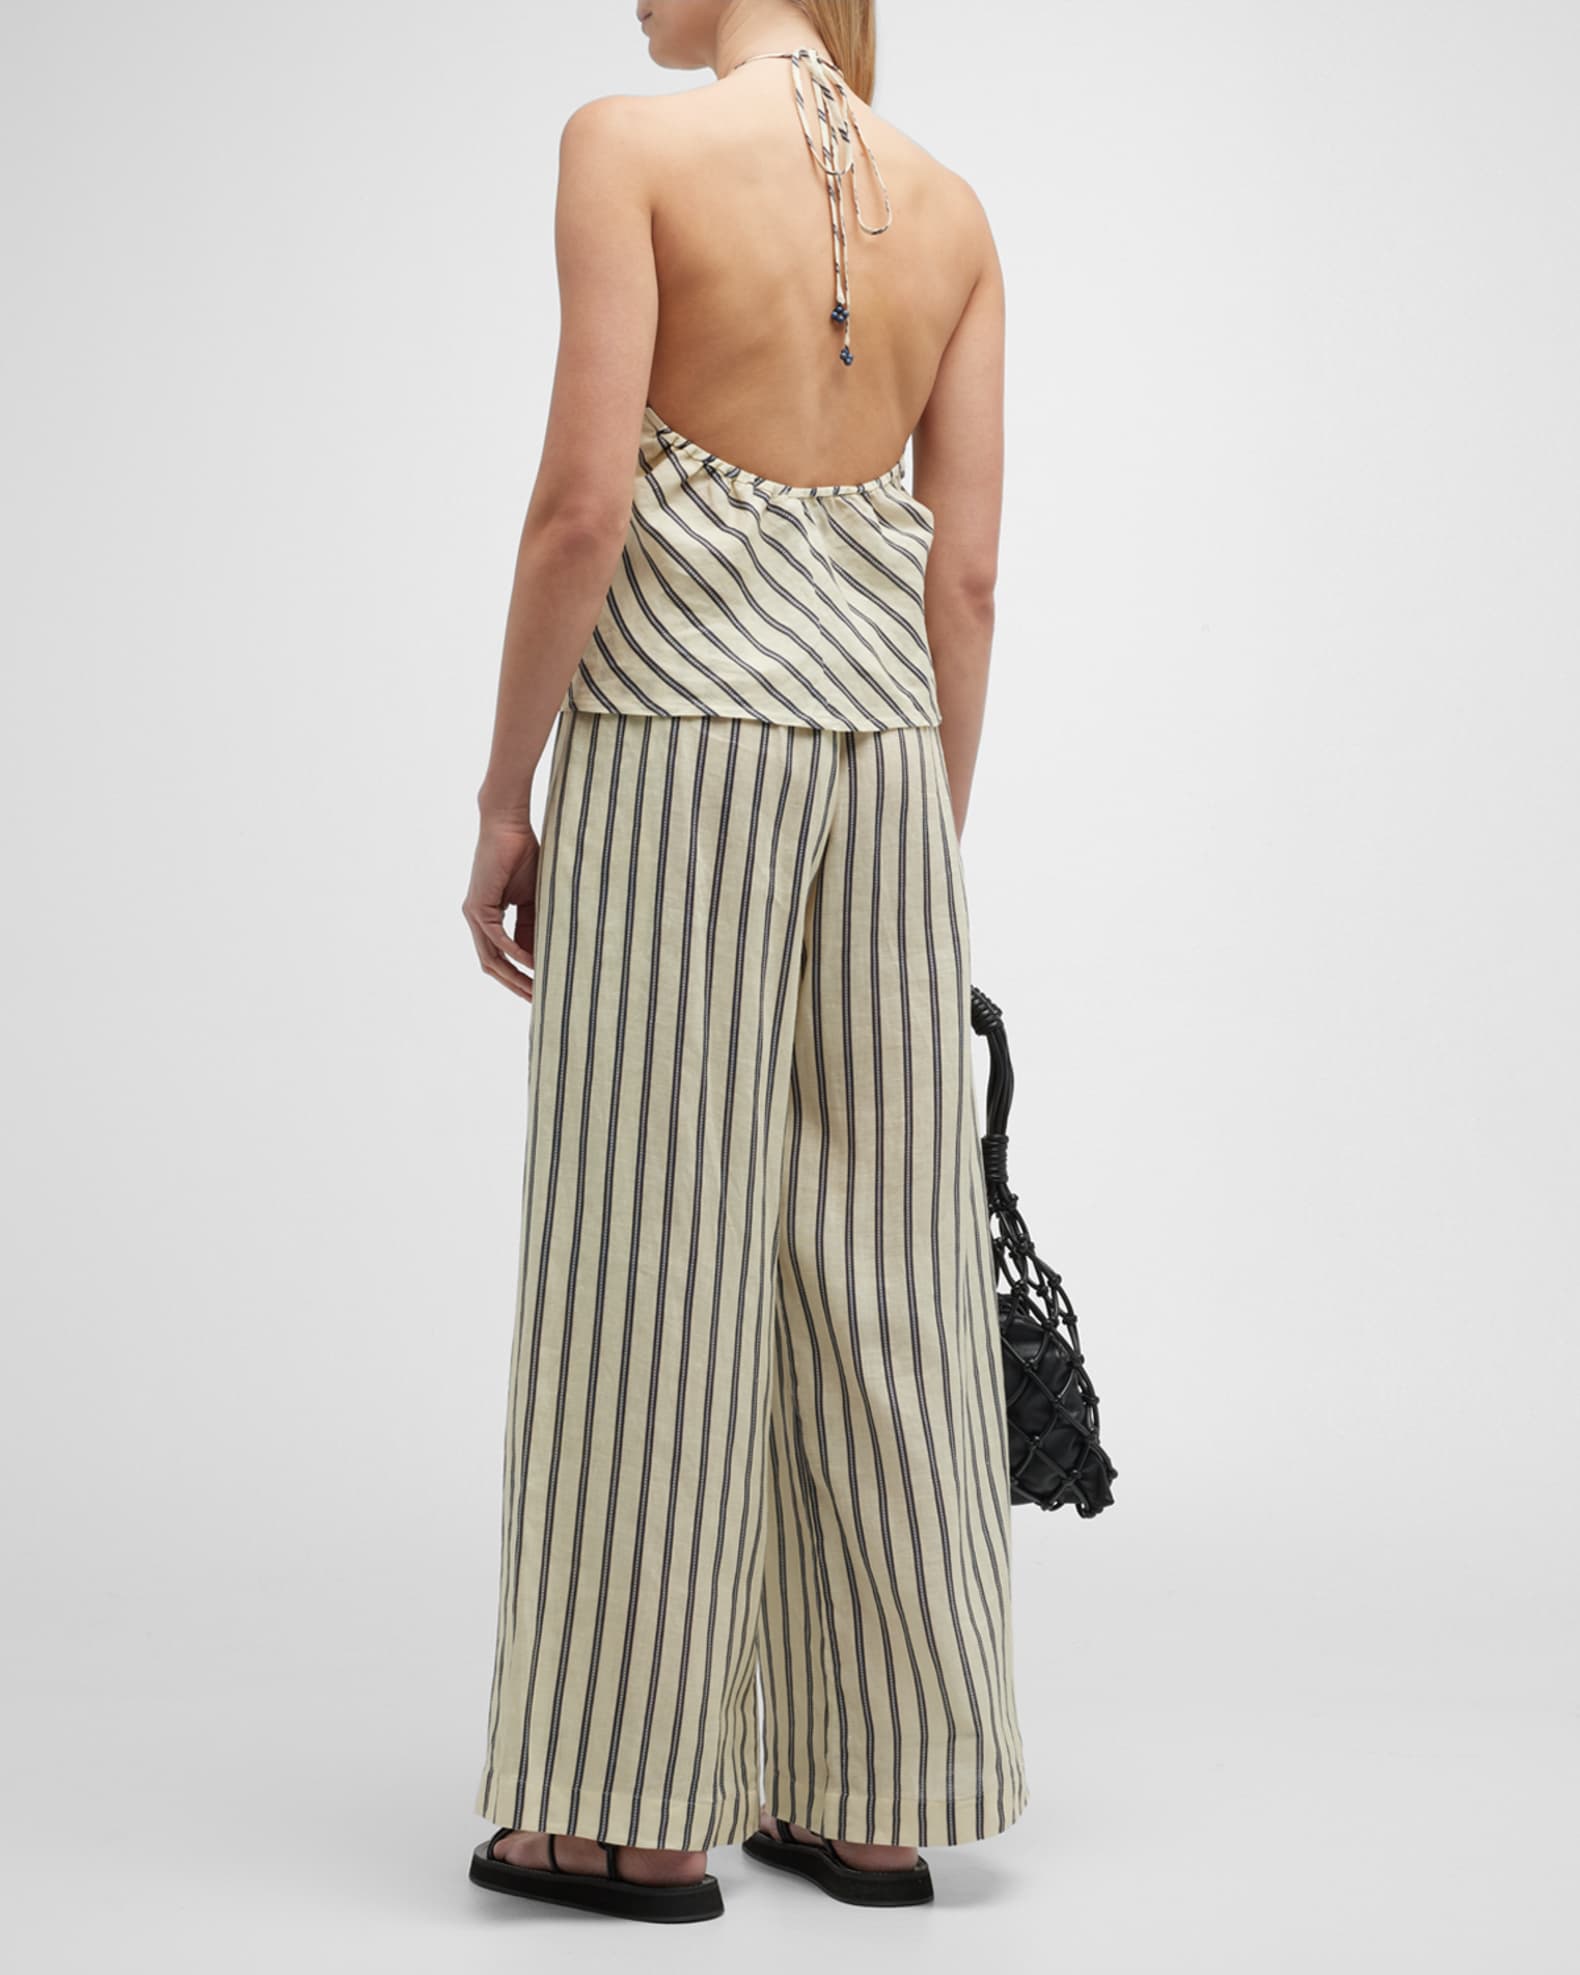 Striped Linen Collection | Neiman Marcus